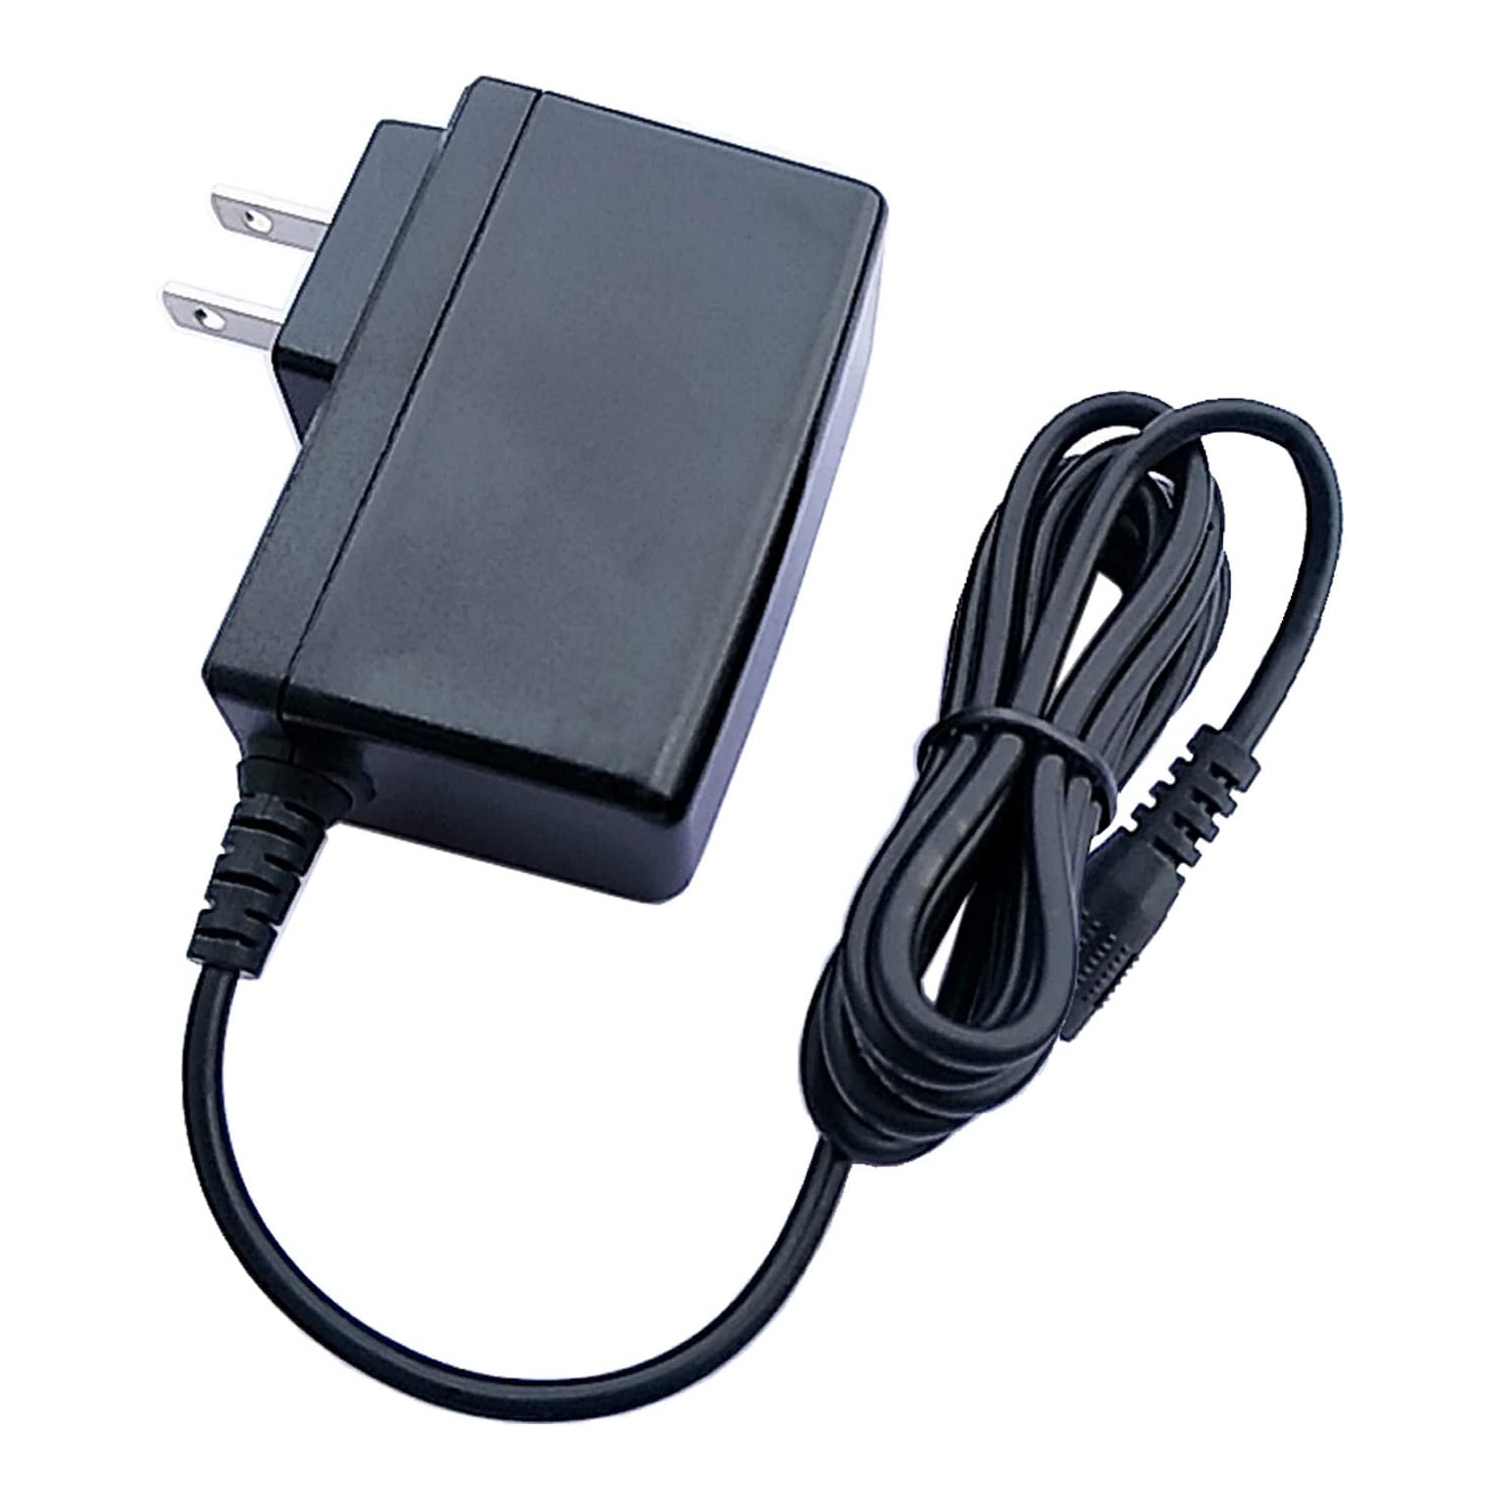 New 5V AC/DC Adapter Compatible with Dell Venue 7 8 11 Pro 7130 7139 3730 3830 5830 T07G T07G001 T07G002 7140